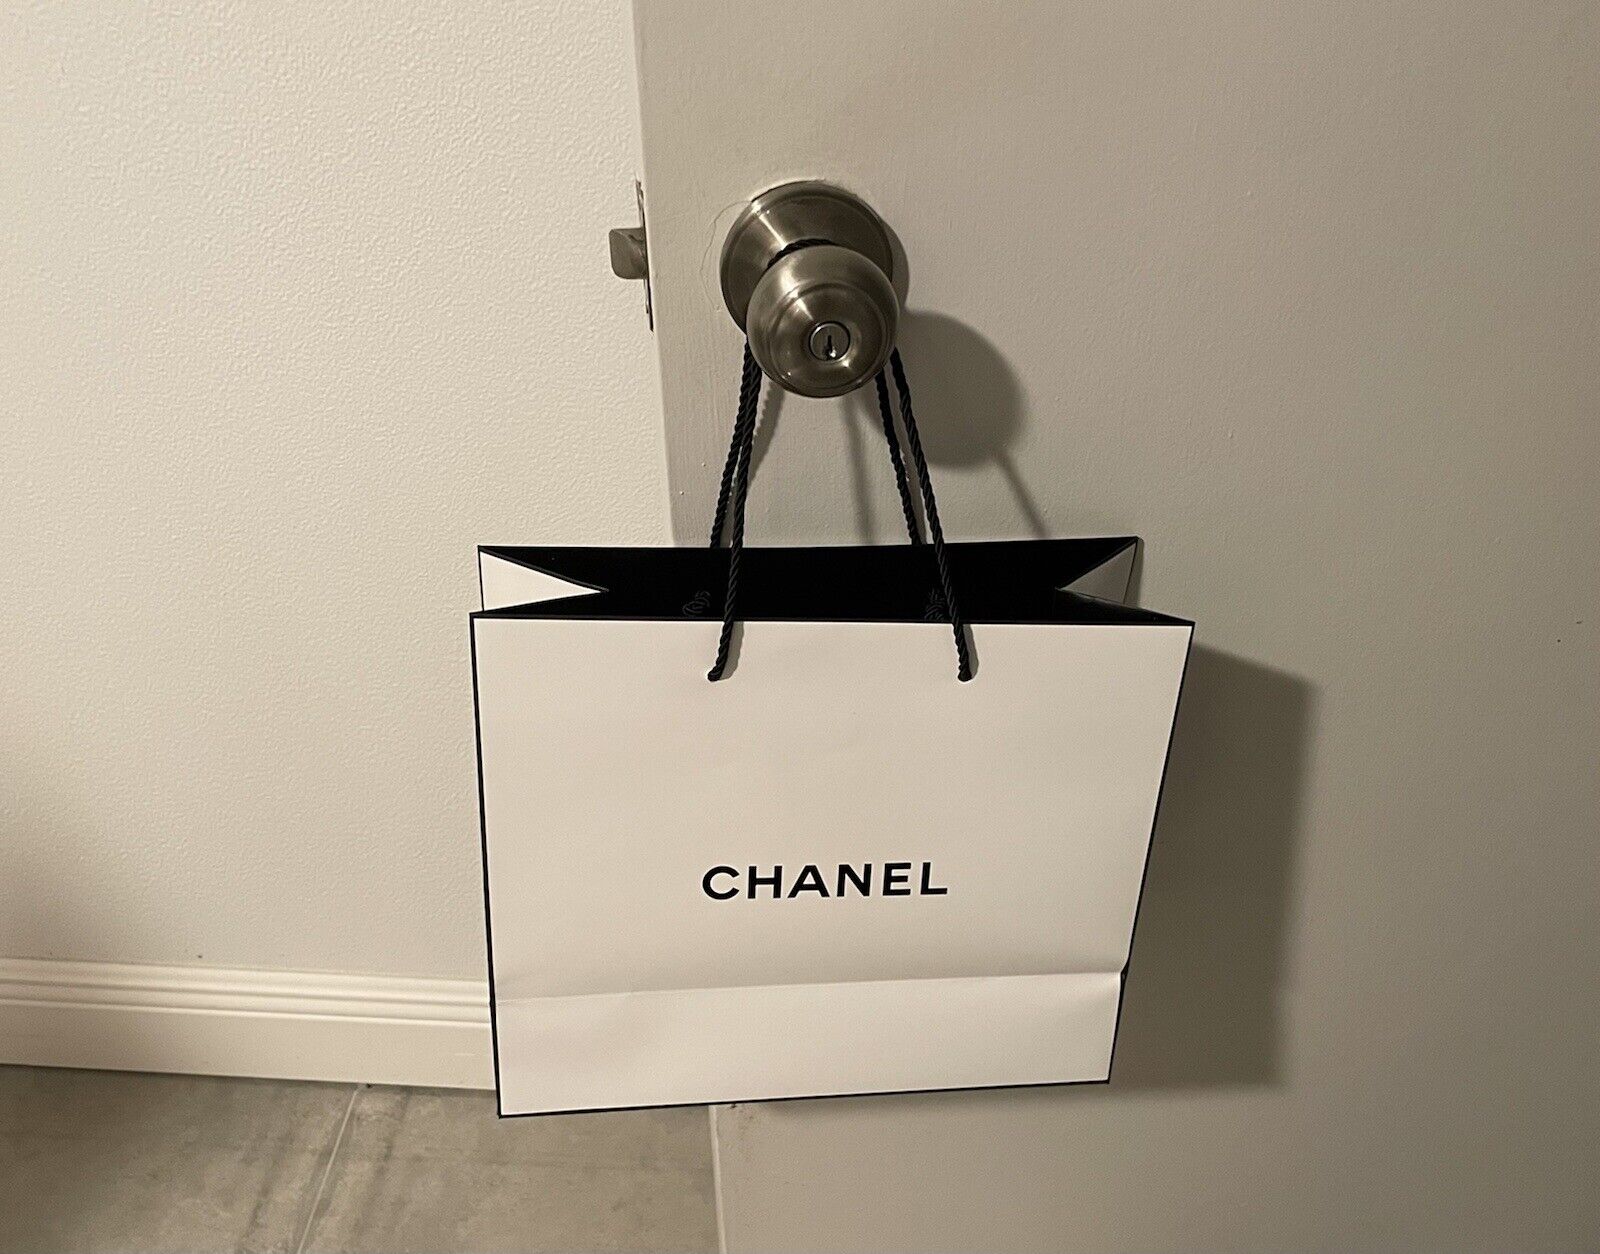 CHANEL Signature Large White Paper Gift Shopping Bag 11.25”x 9.7.”i4.75”Inches